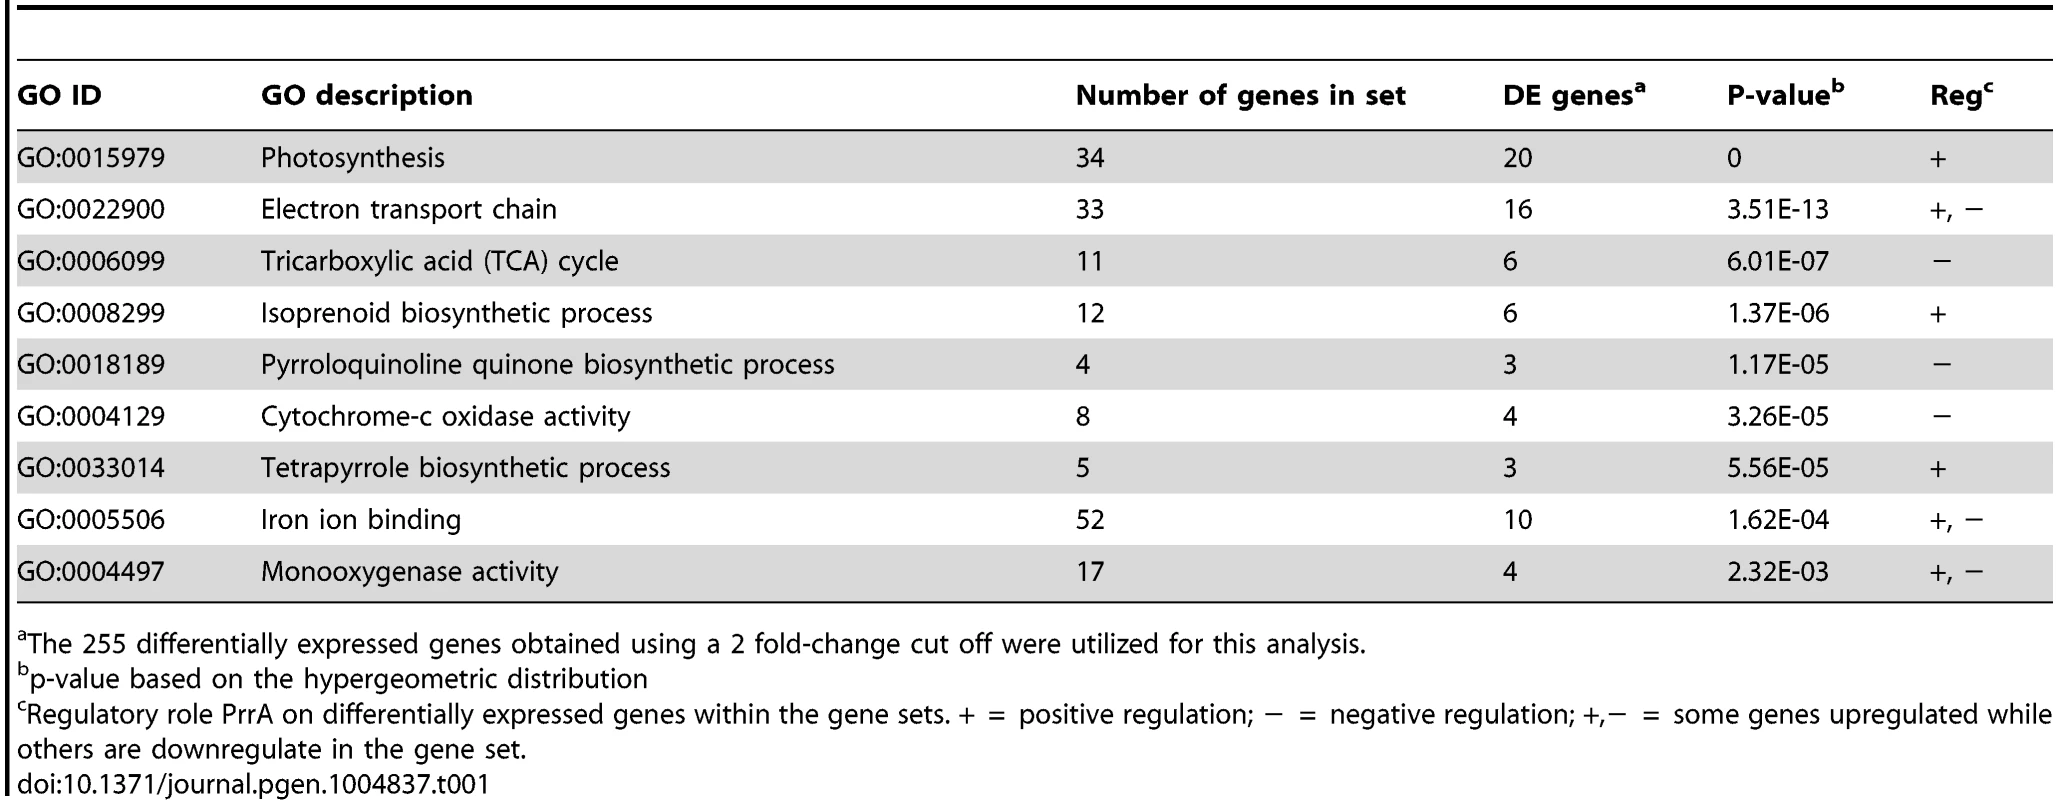 GO functional categories significantly enriched for genes regulated by PrrA.